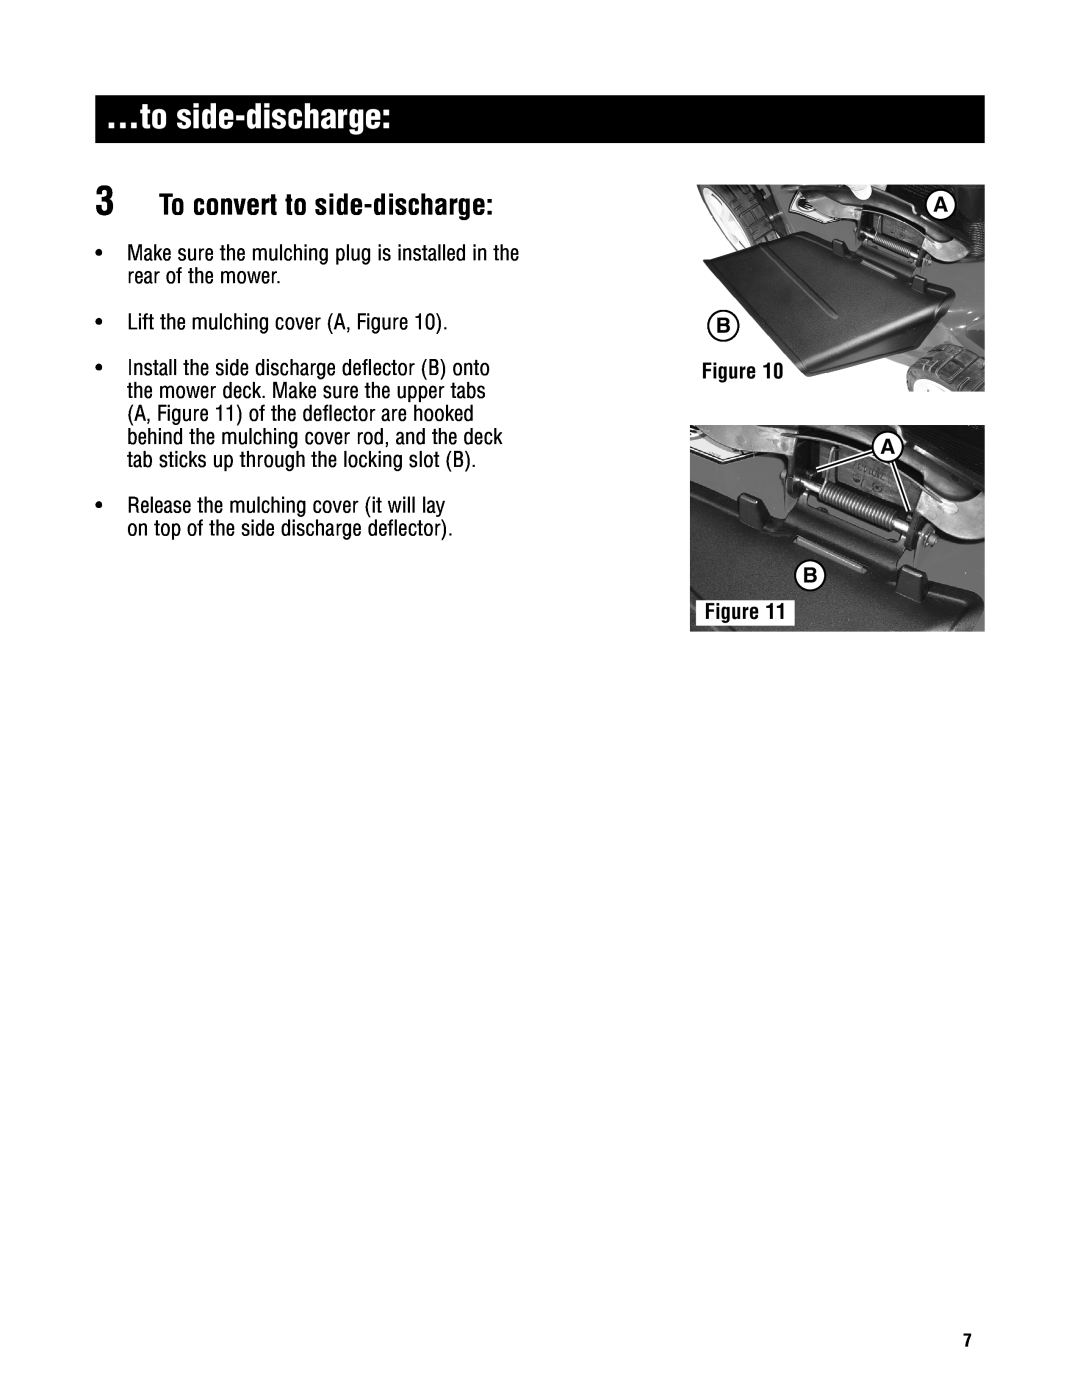 Snapper ESPV21675 manual To convert to side-discharge, A B Figure 